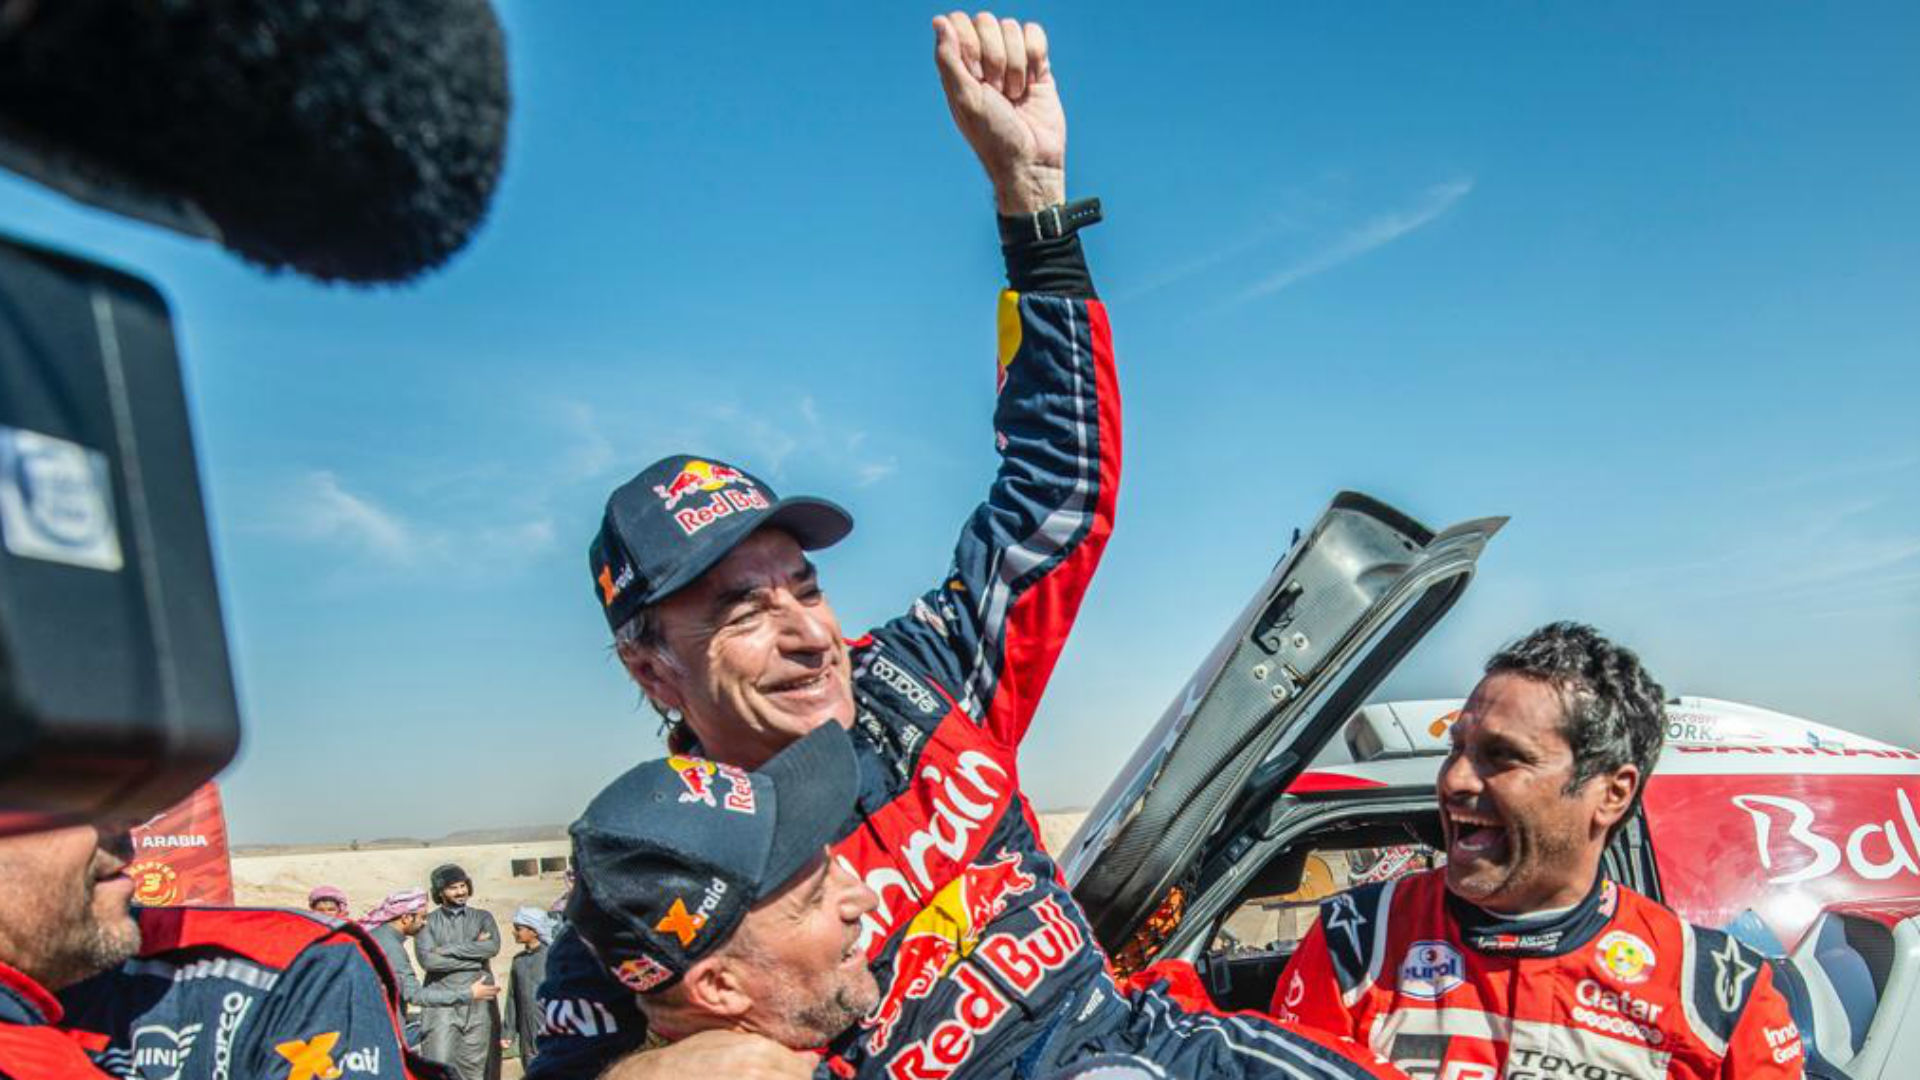 At the age of 57, Carlos Sainz secured Dakar Rally glory for the third time in his incredible career.